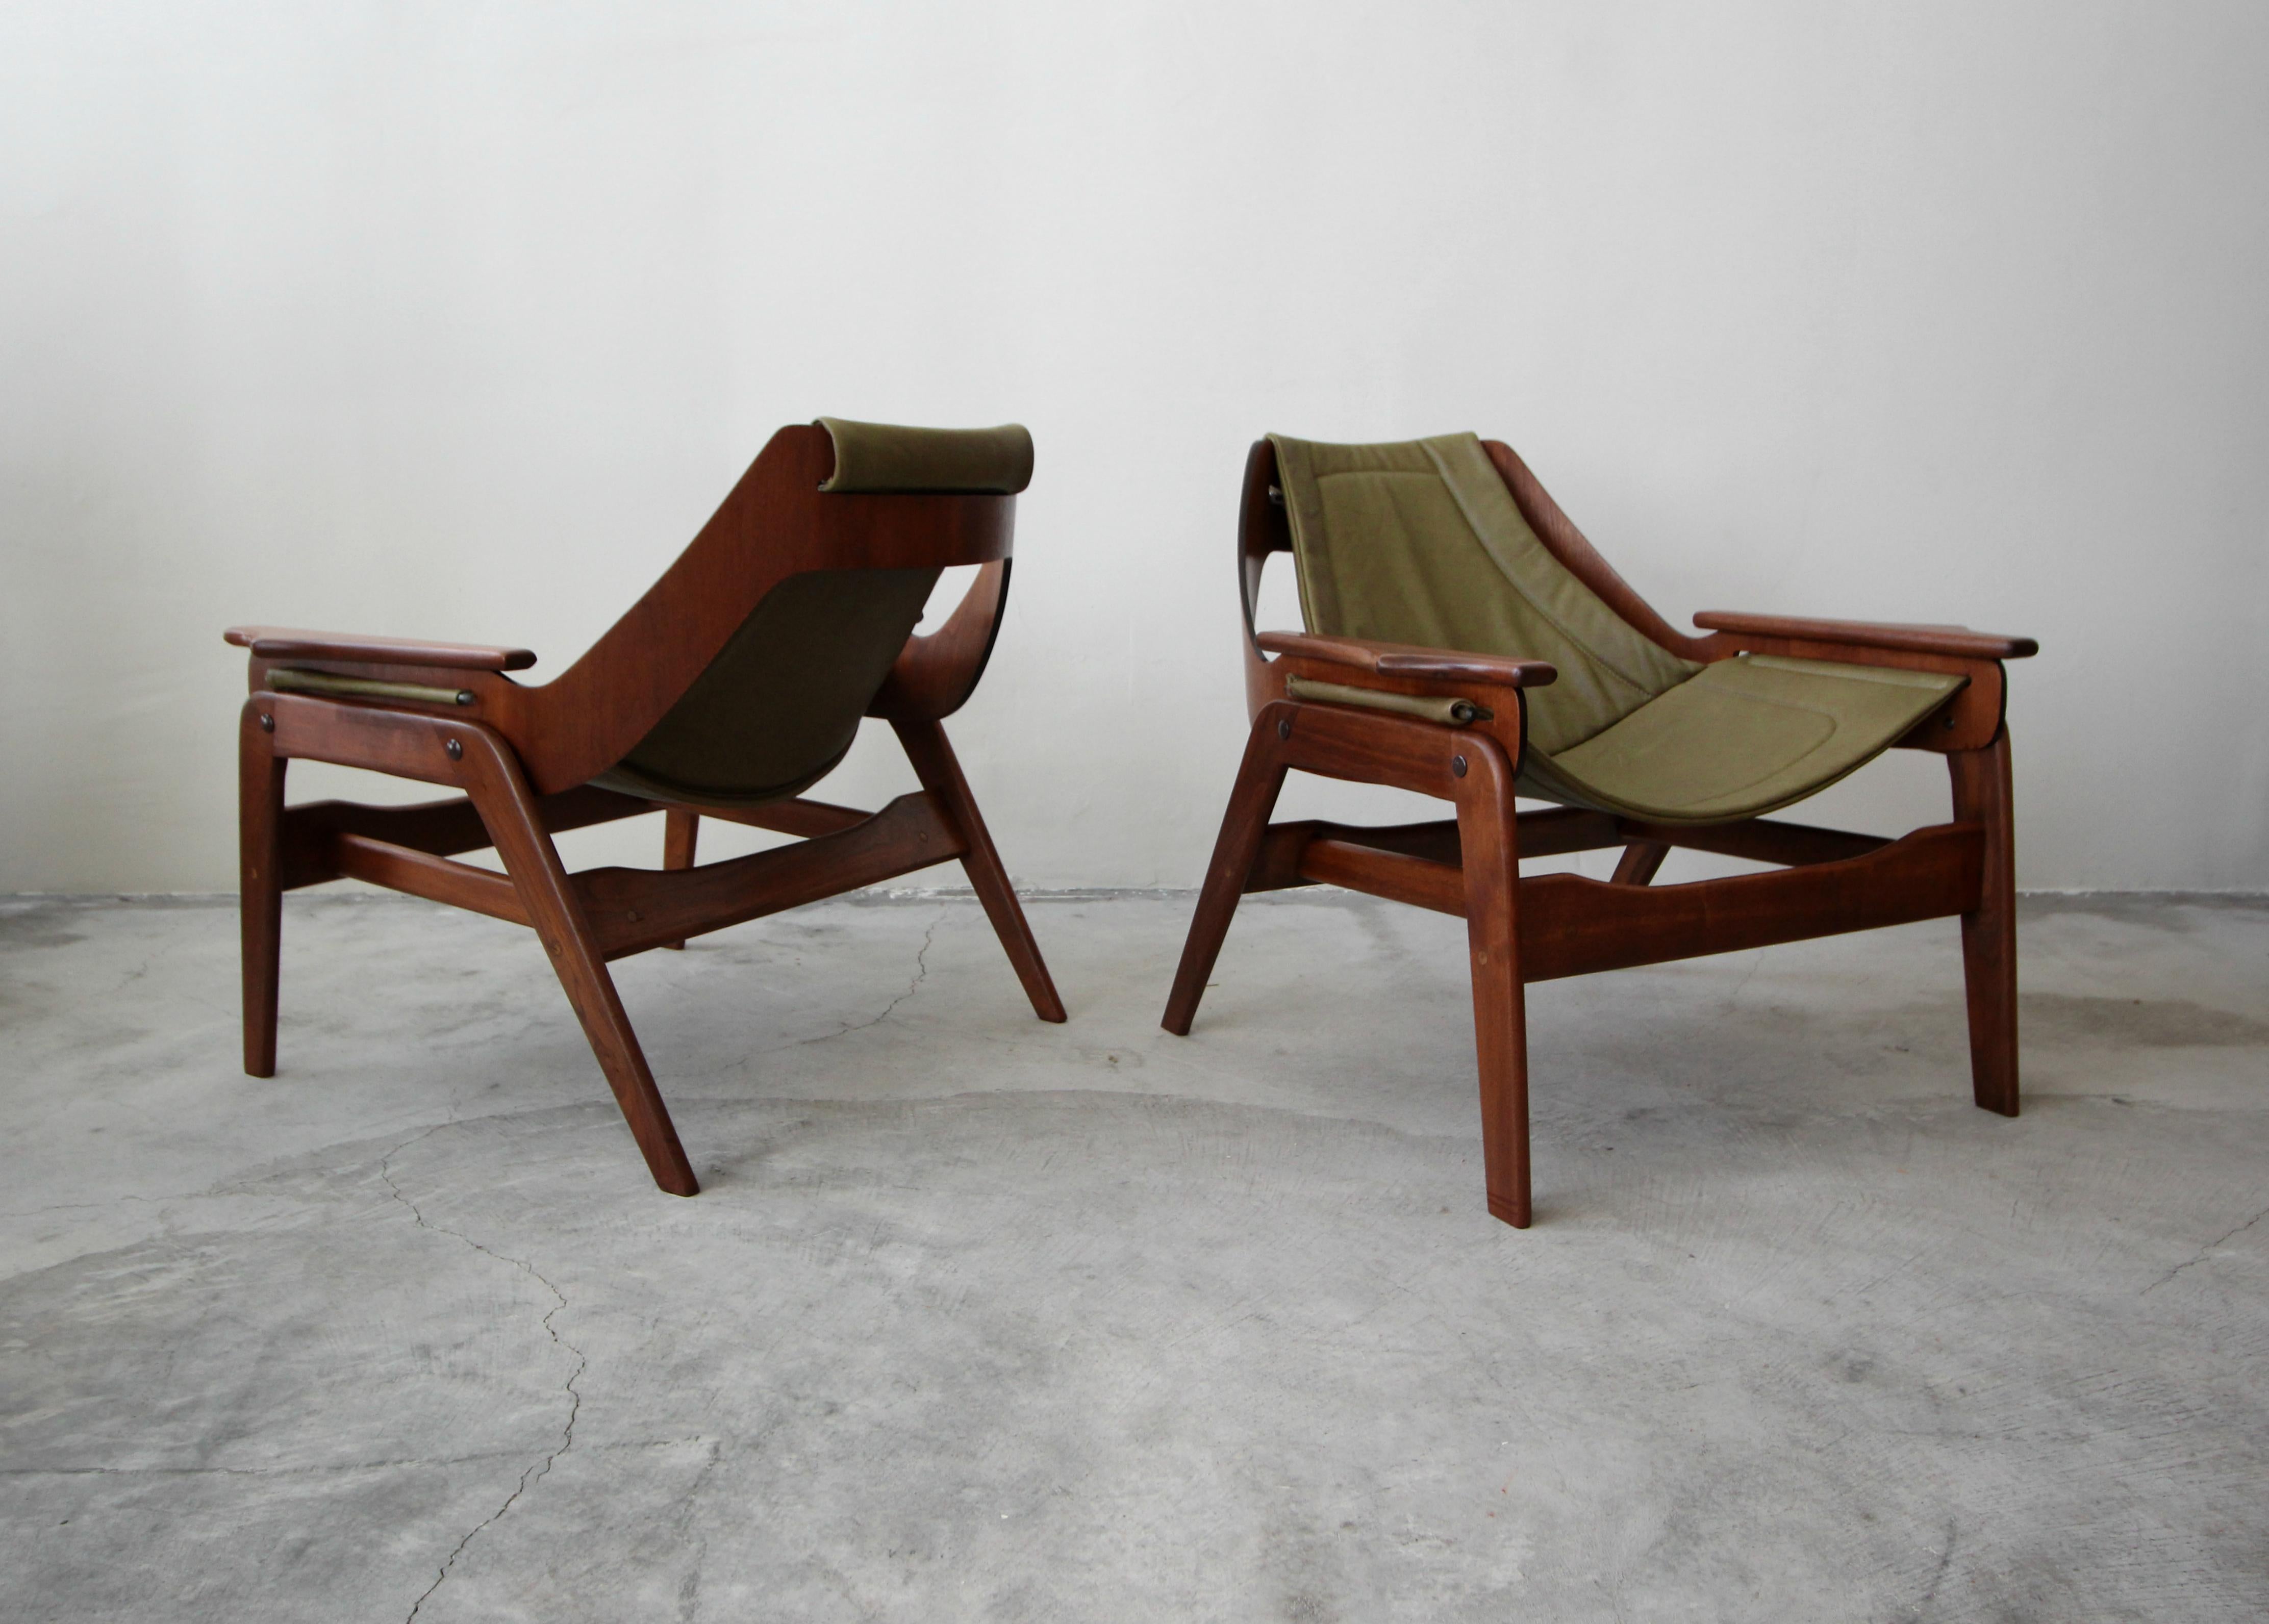 Beautiful pair of midcentury walnut and leather sling chairs by Jerry Johnson. The chairs feature beautiful sculptural frames and newly upholstered olive green slings. These chairs are the epitome of midcentury seating. More like art than chairs